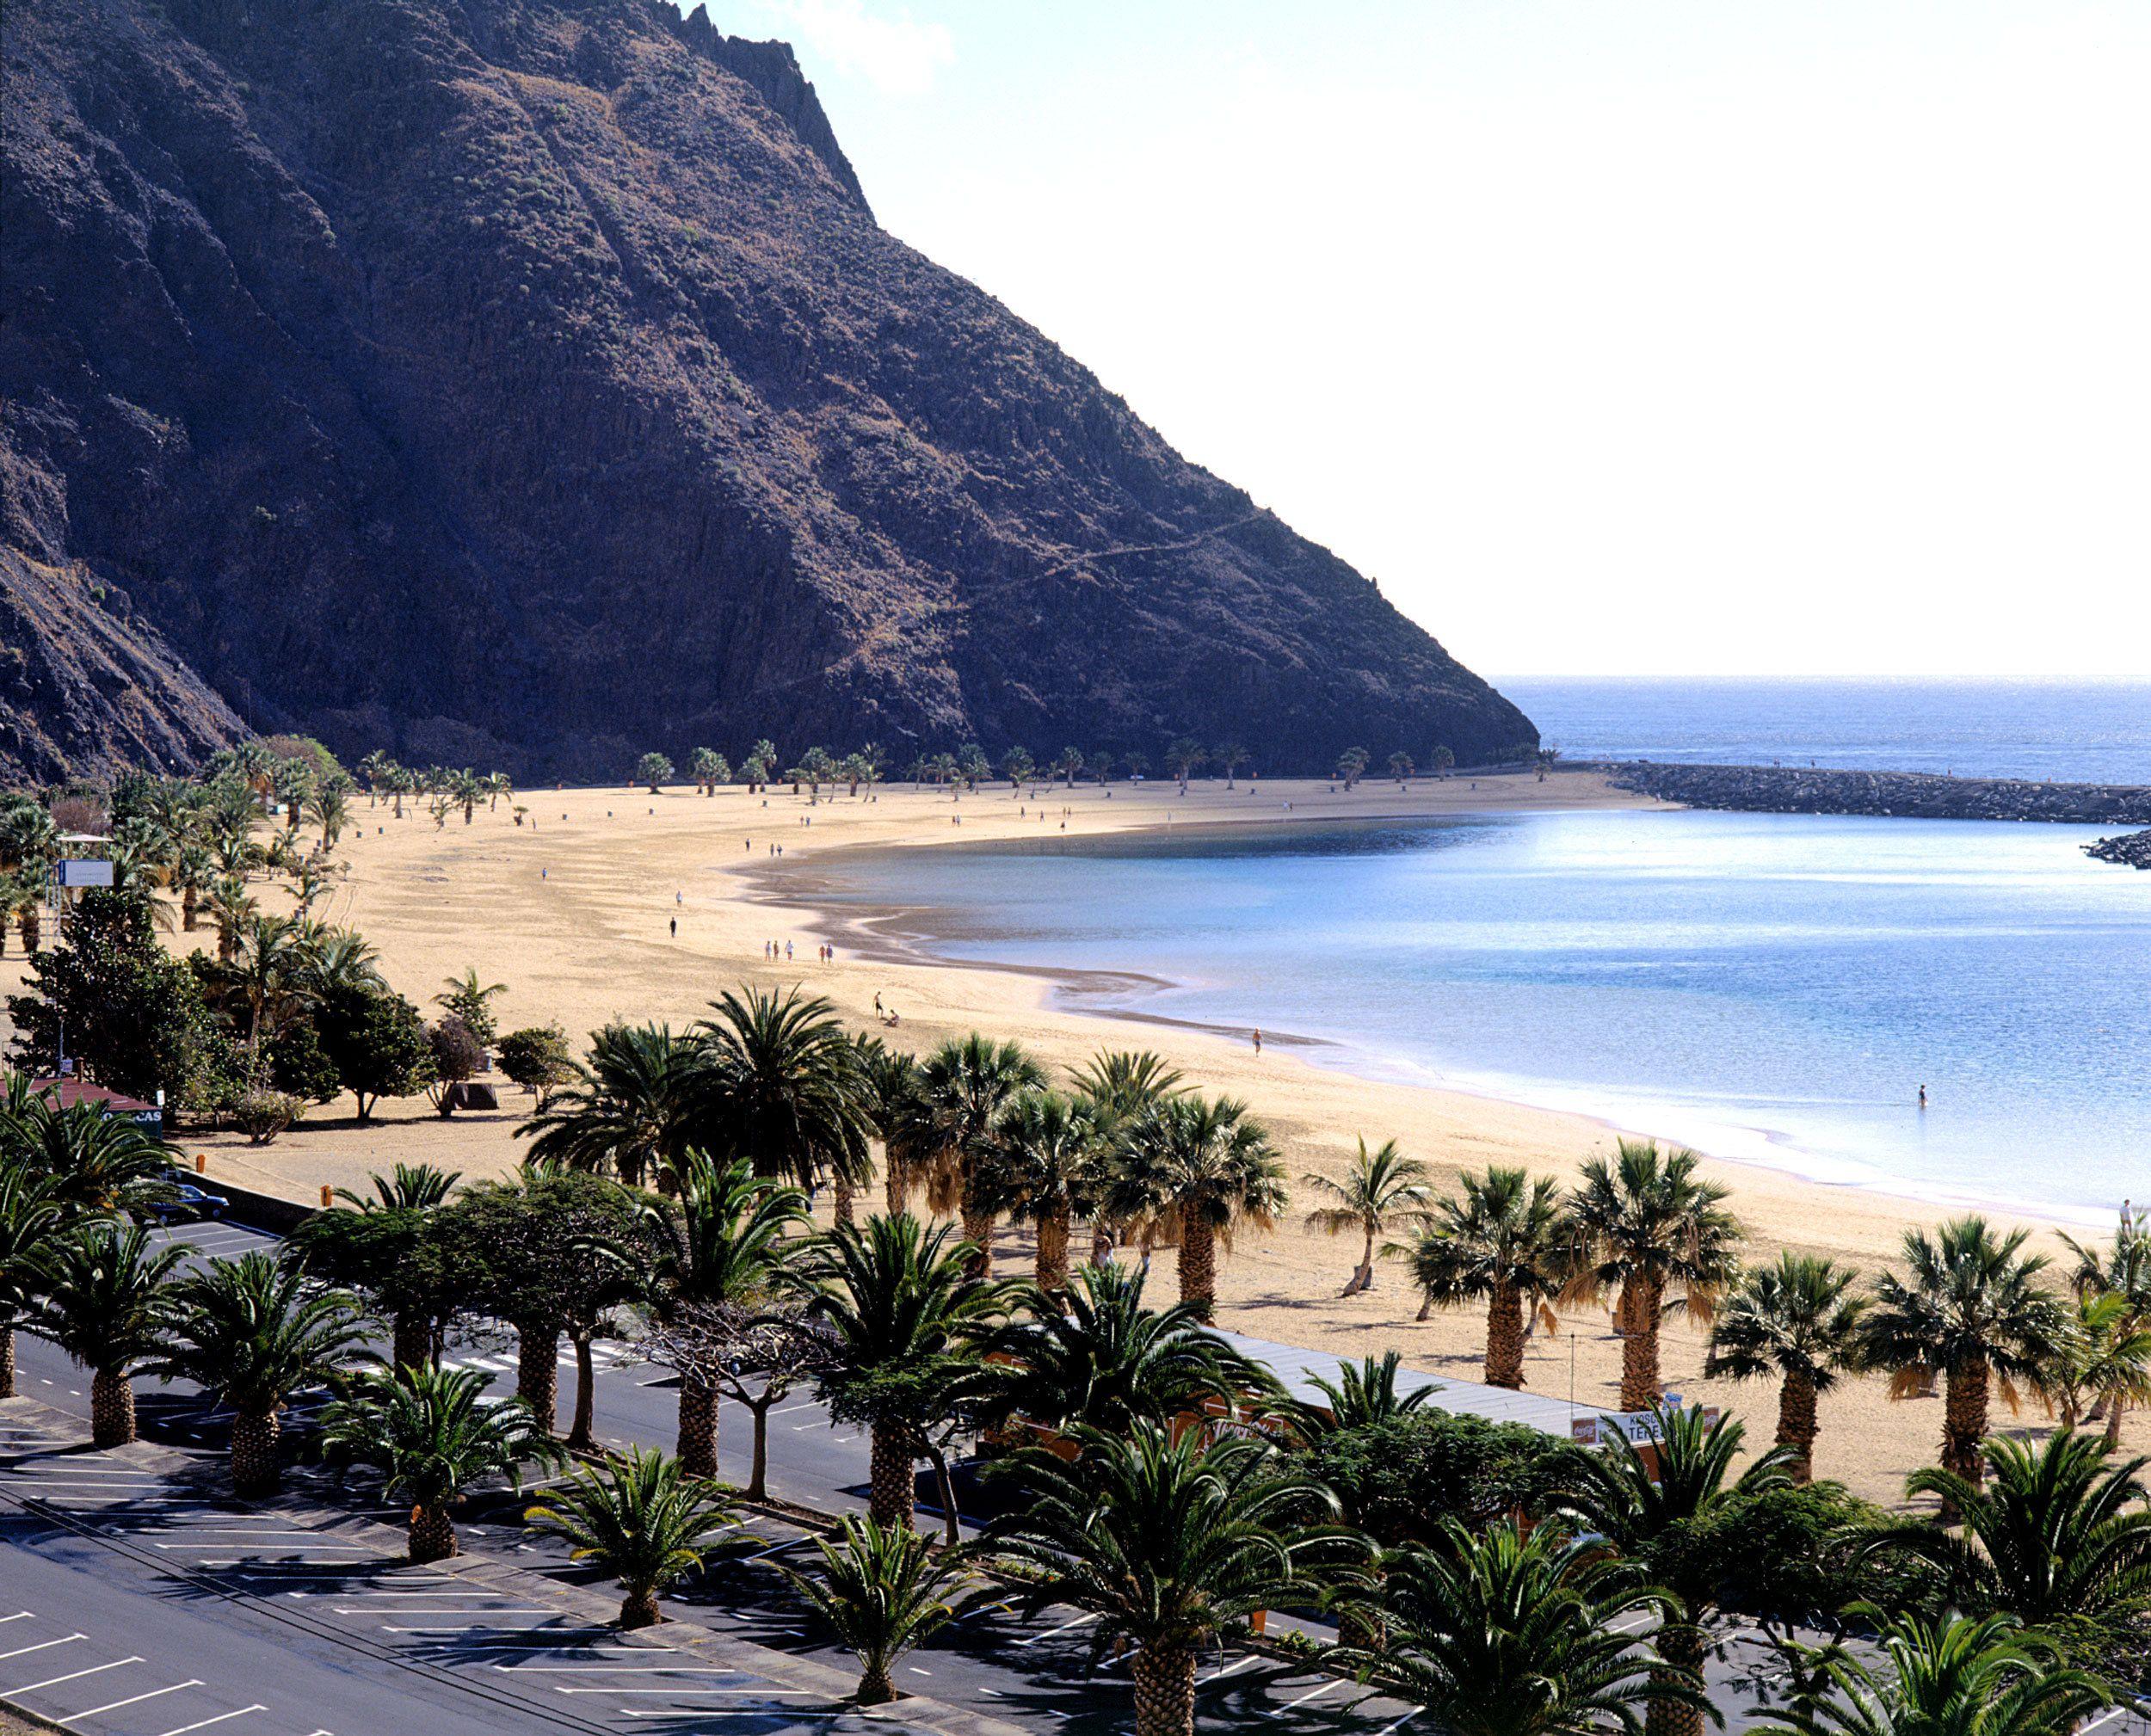 White Beach in Tenerife wallpaper and image, picture